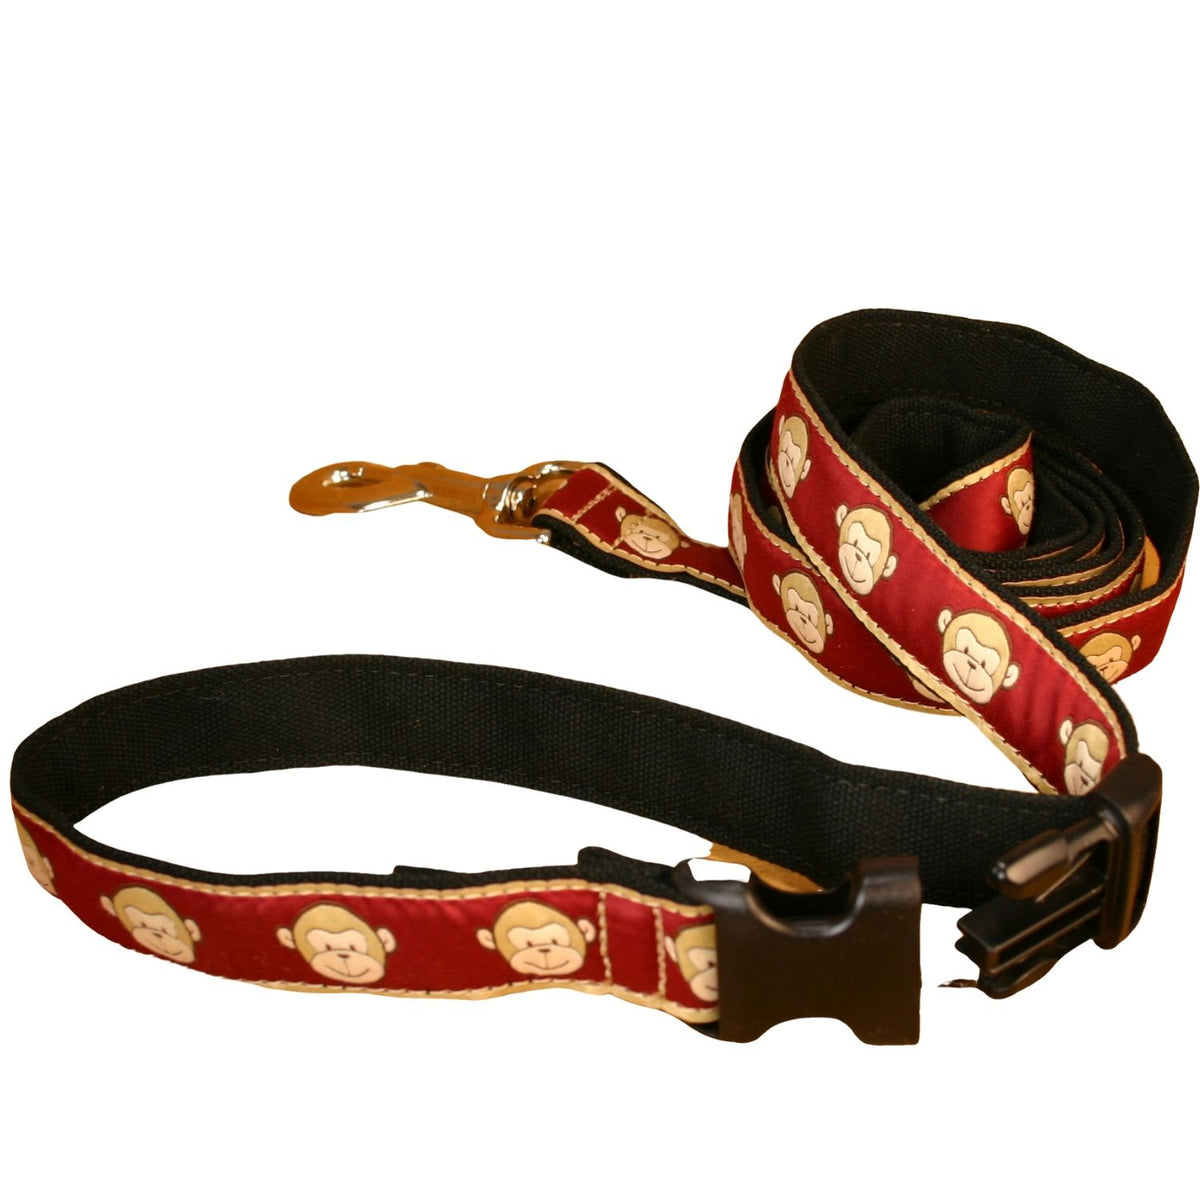 Natural Hemp Dog and Cat Collars, Leashes, Harnesses, & Toys.